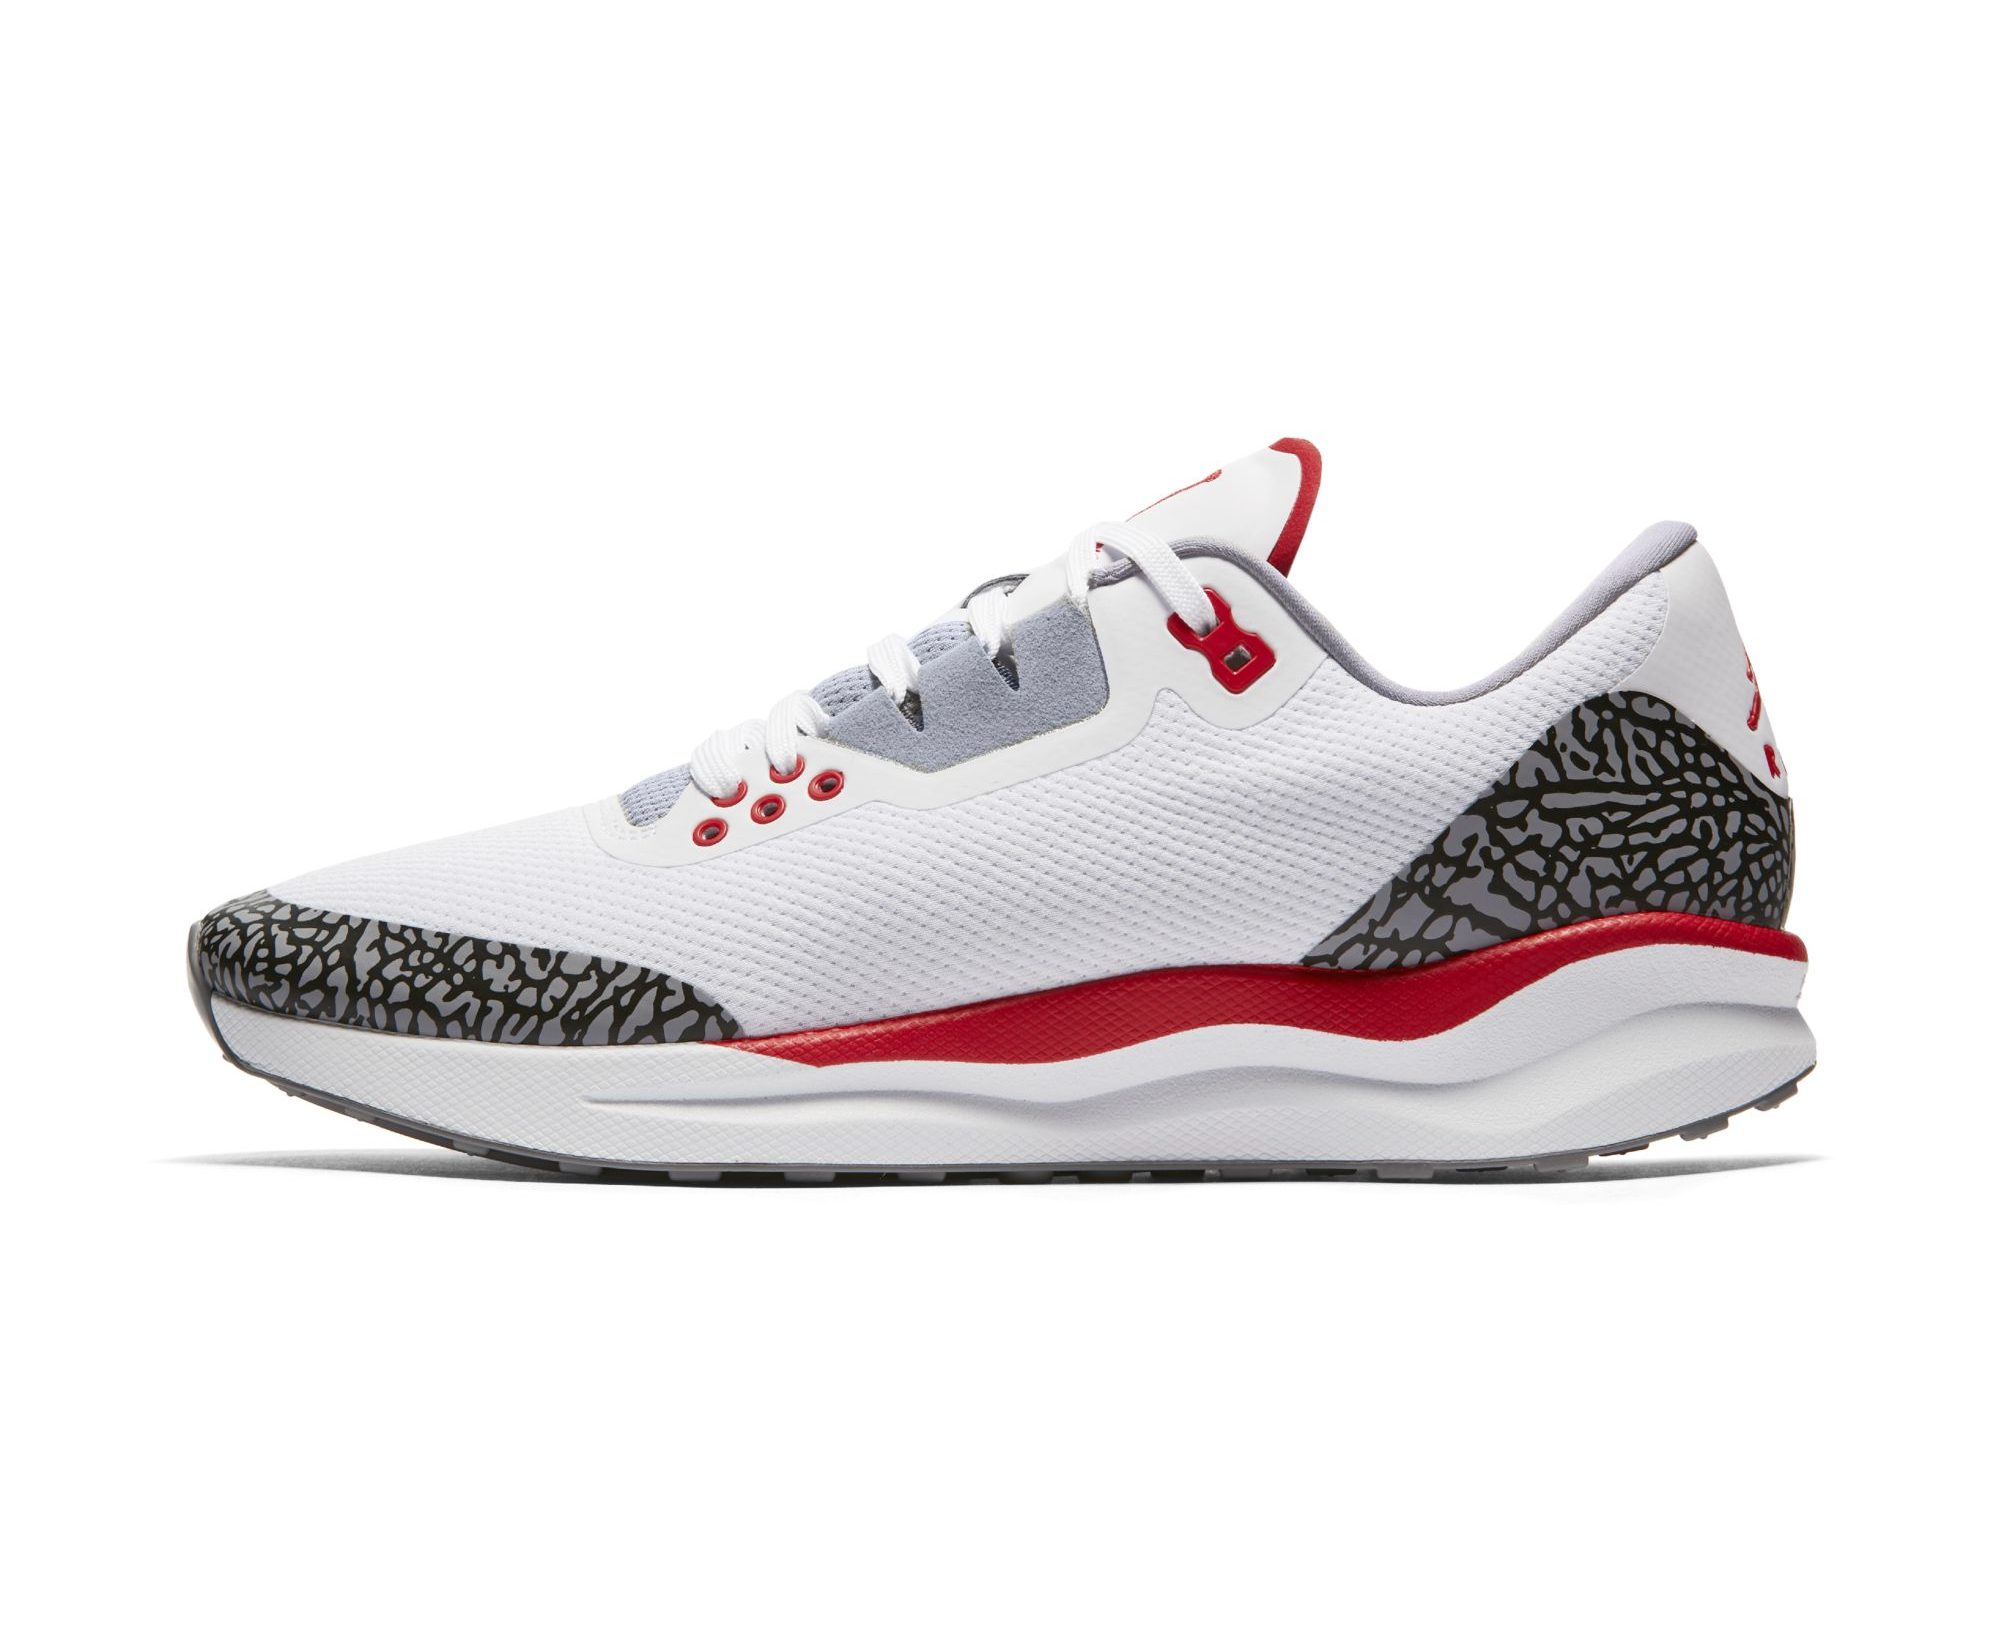 licens Lamme Absorbere The Latest Jordan Zoom Tenacity 88 Honors the Air Jordan 3 'Fire Red' -  WearTesters